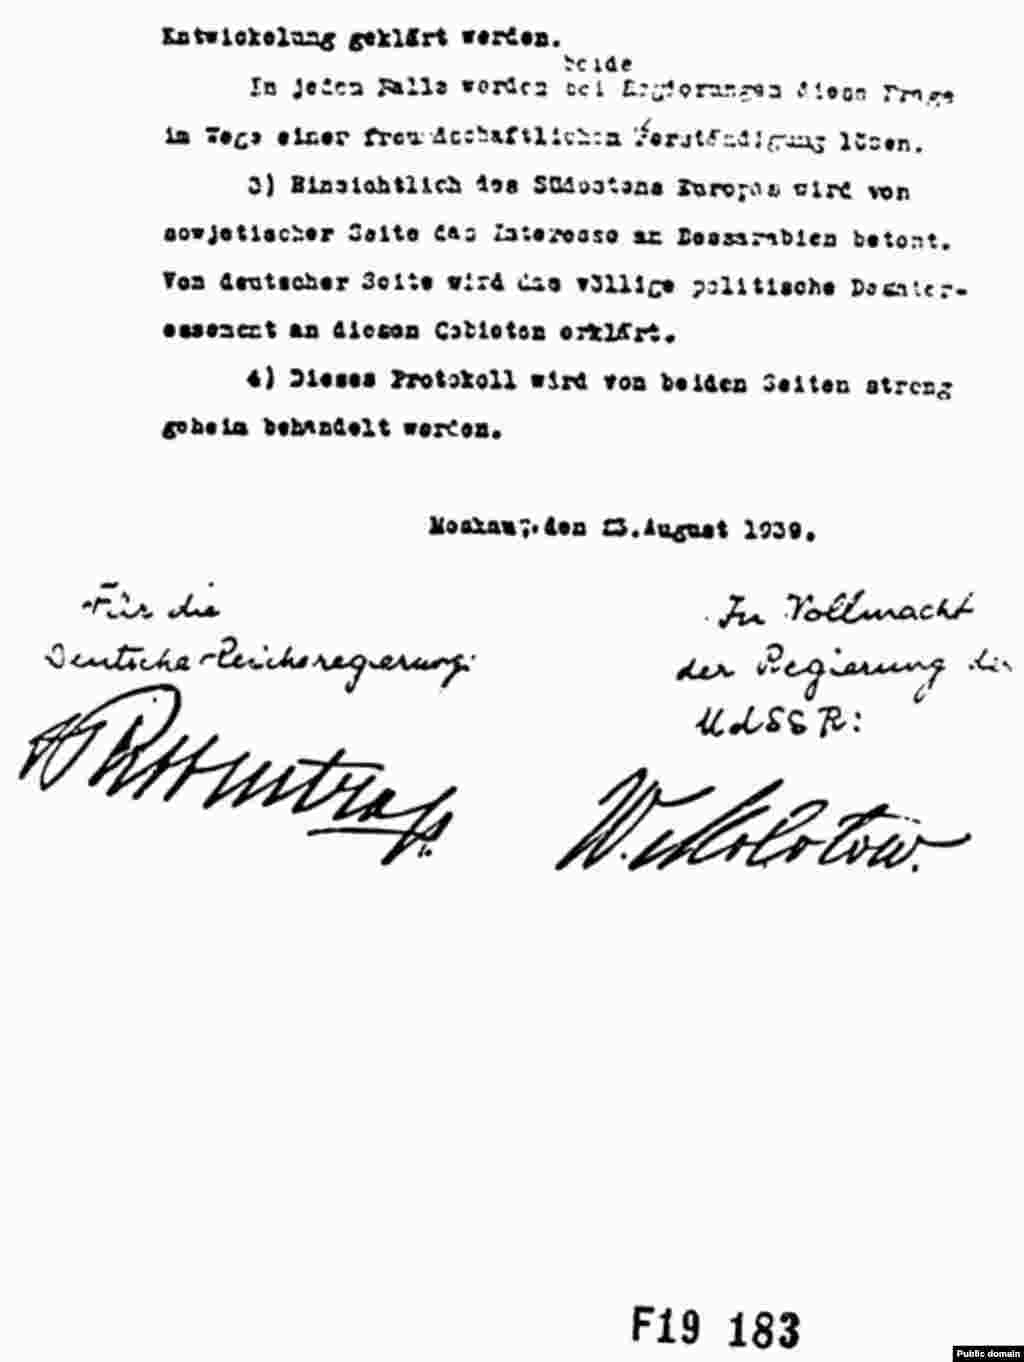 The final page, in German, of the Additional Secret Protocol, which divided Central and Eastern Europe into &quot;spheres of influence.&quot;